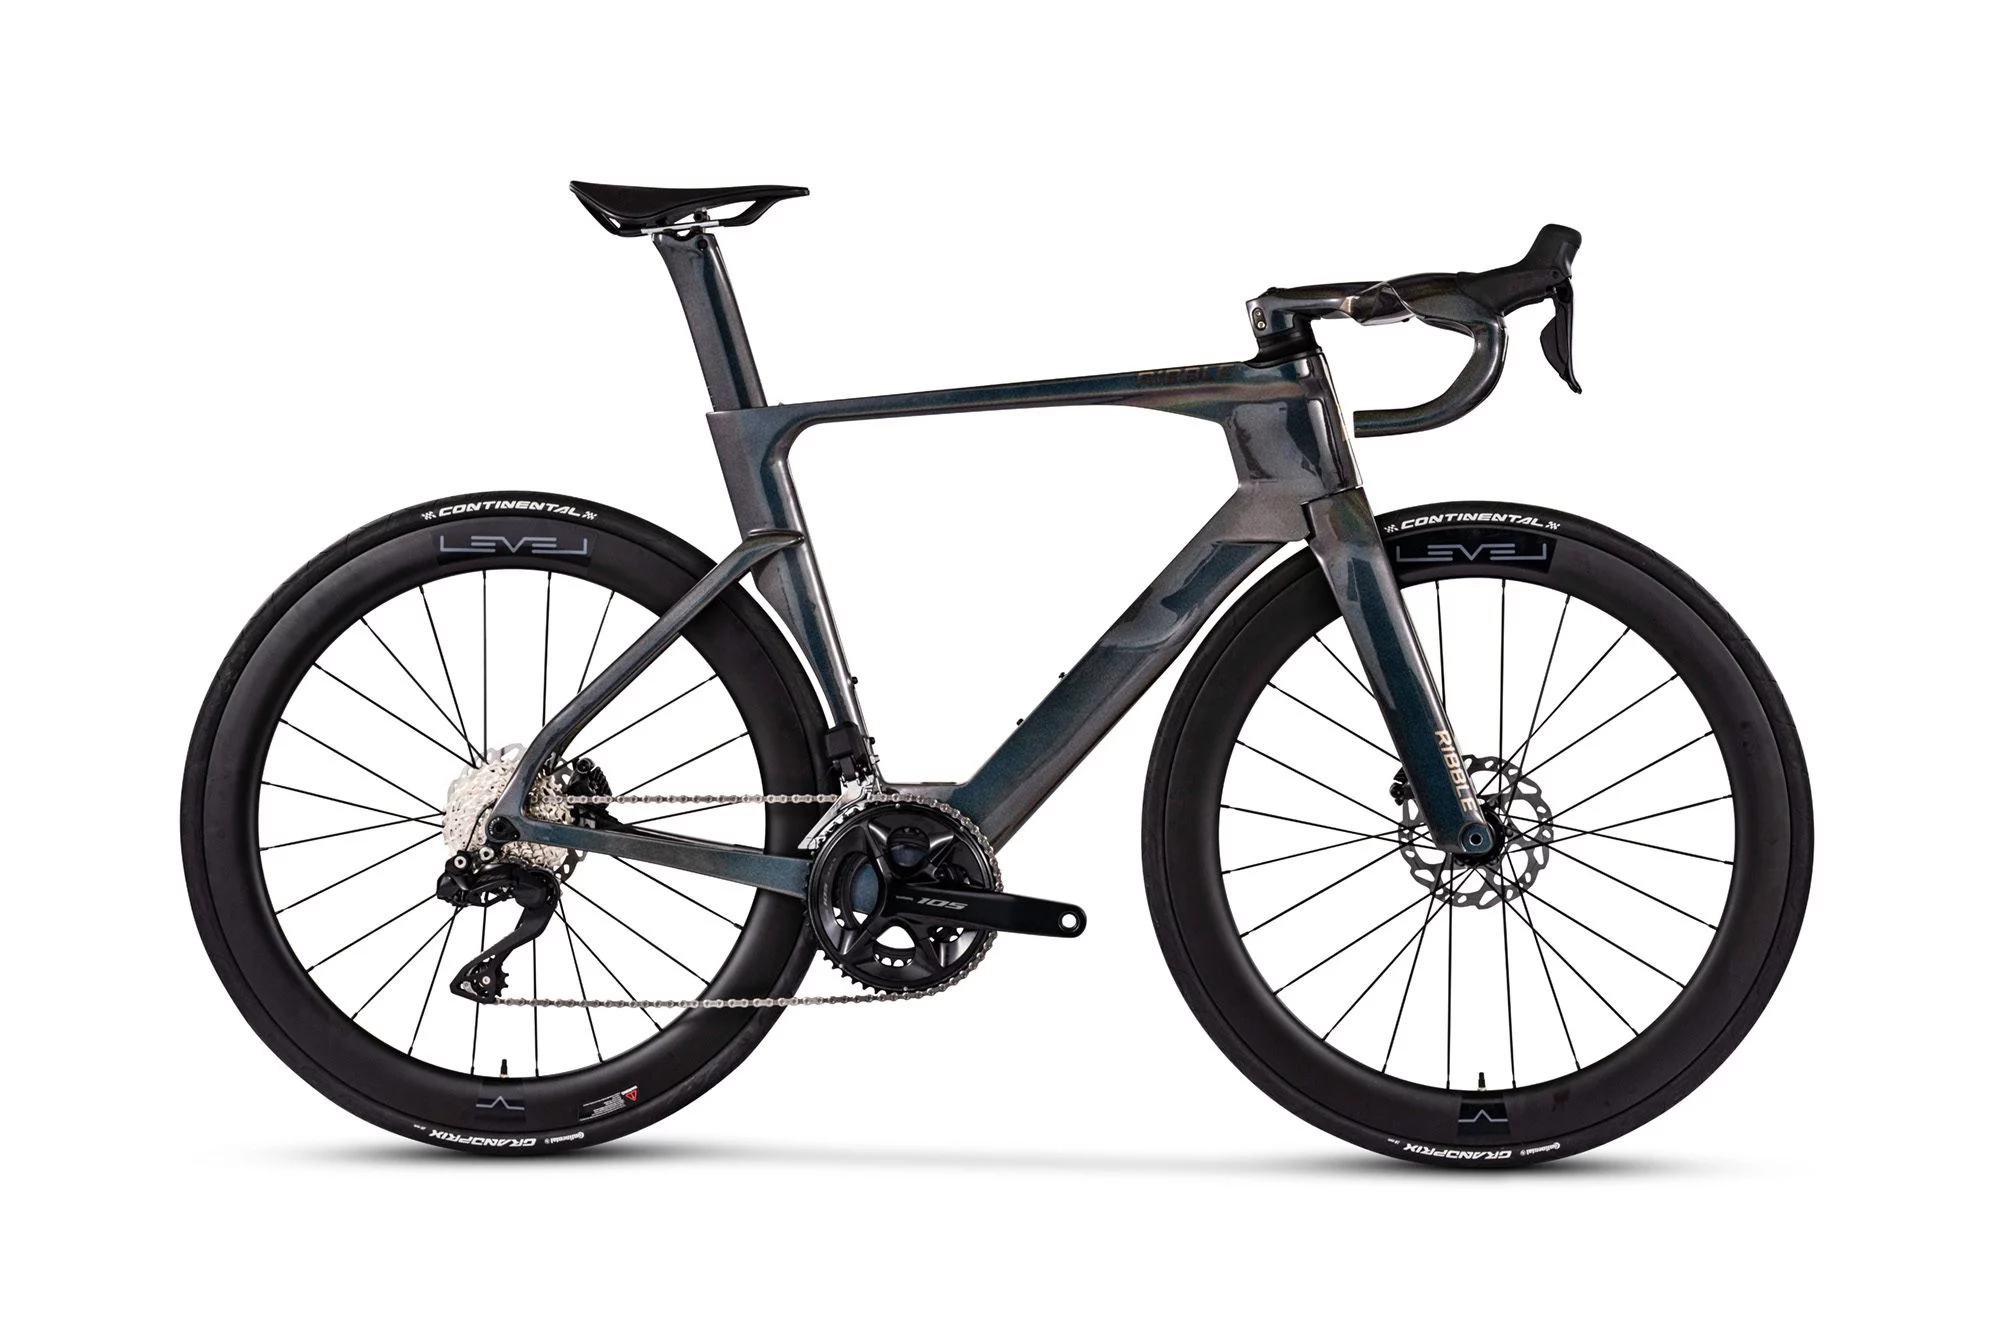 Ribble introduces the all-new SHIMANO 105 Di2 to its range